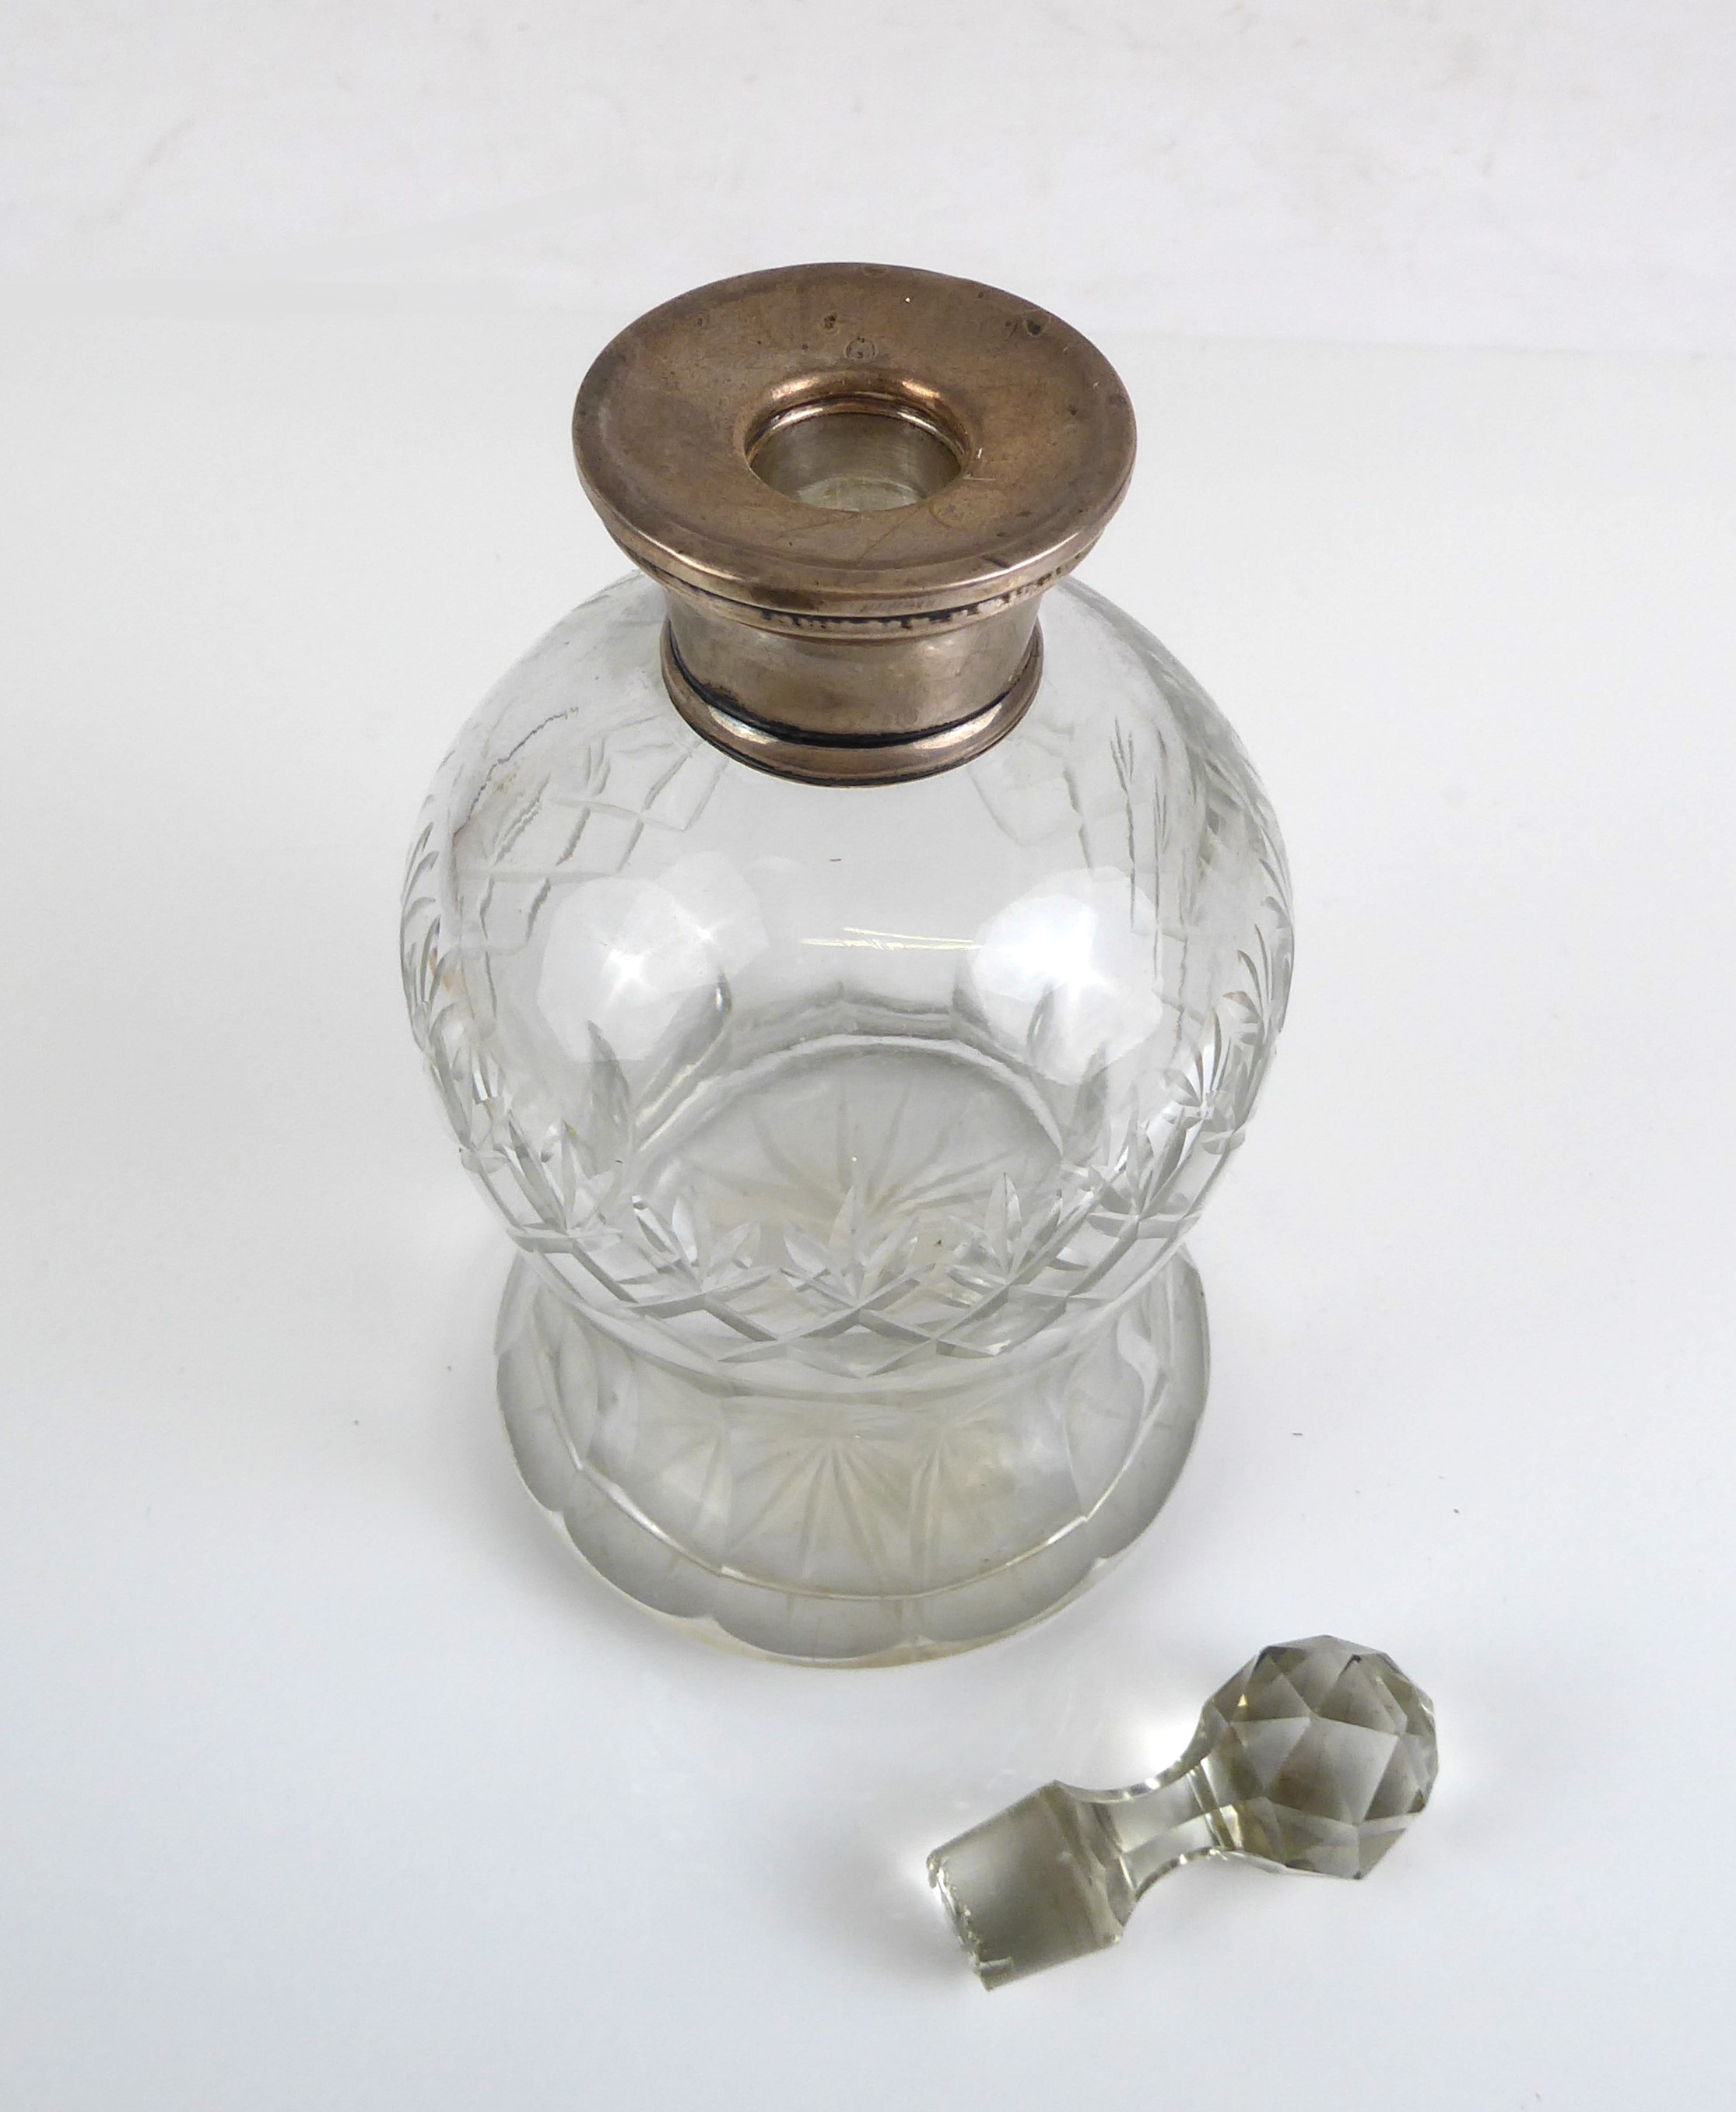 An early 20th century cut-glass ovoid decanter with silver-mounted collar and (probably later) - Image 3 of 3